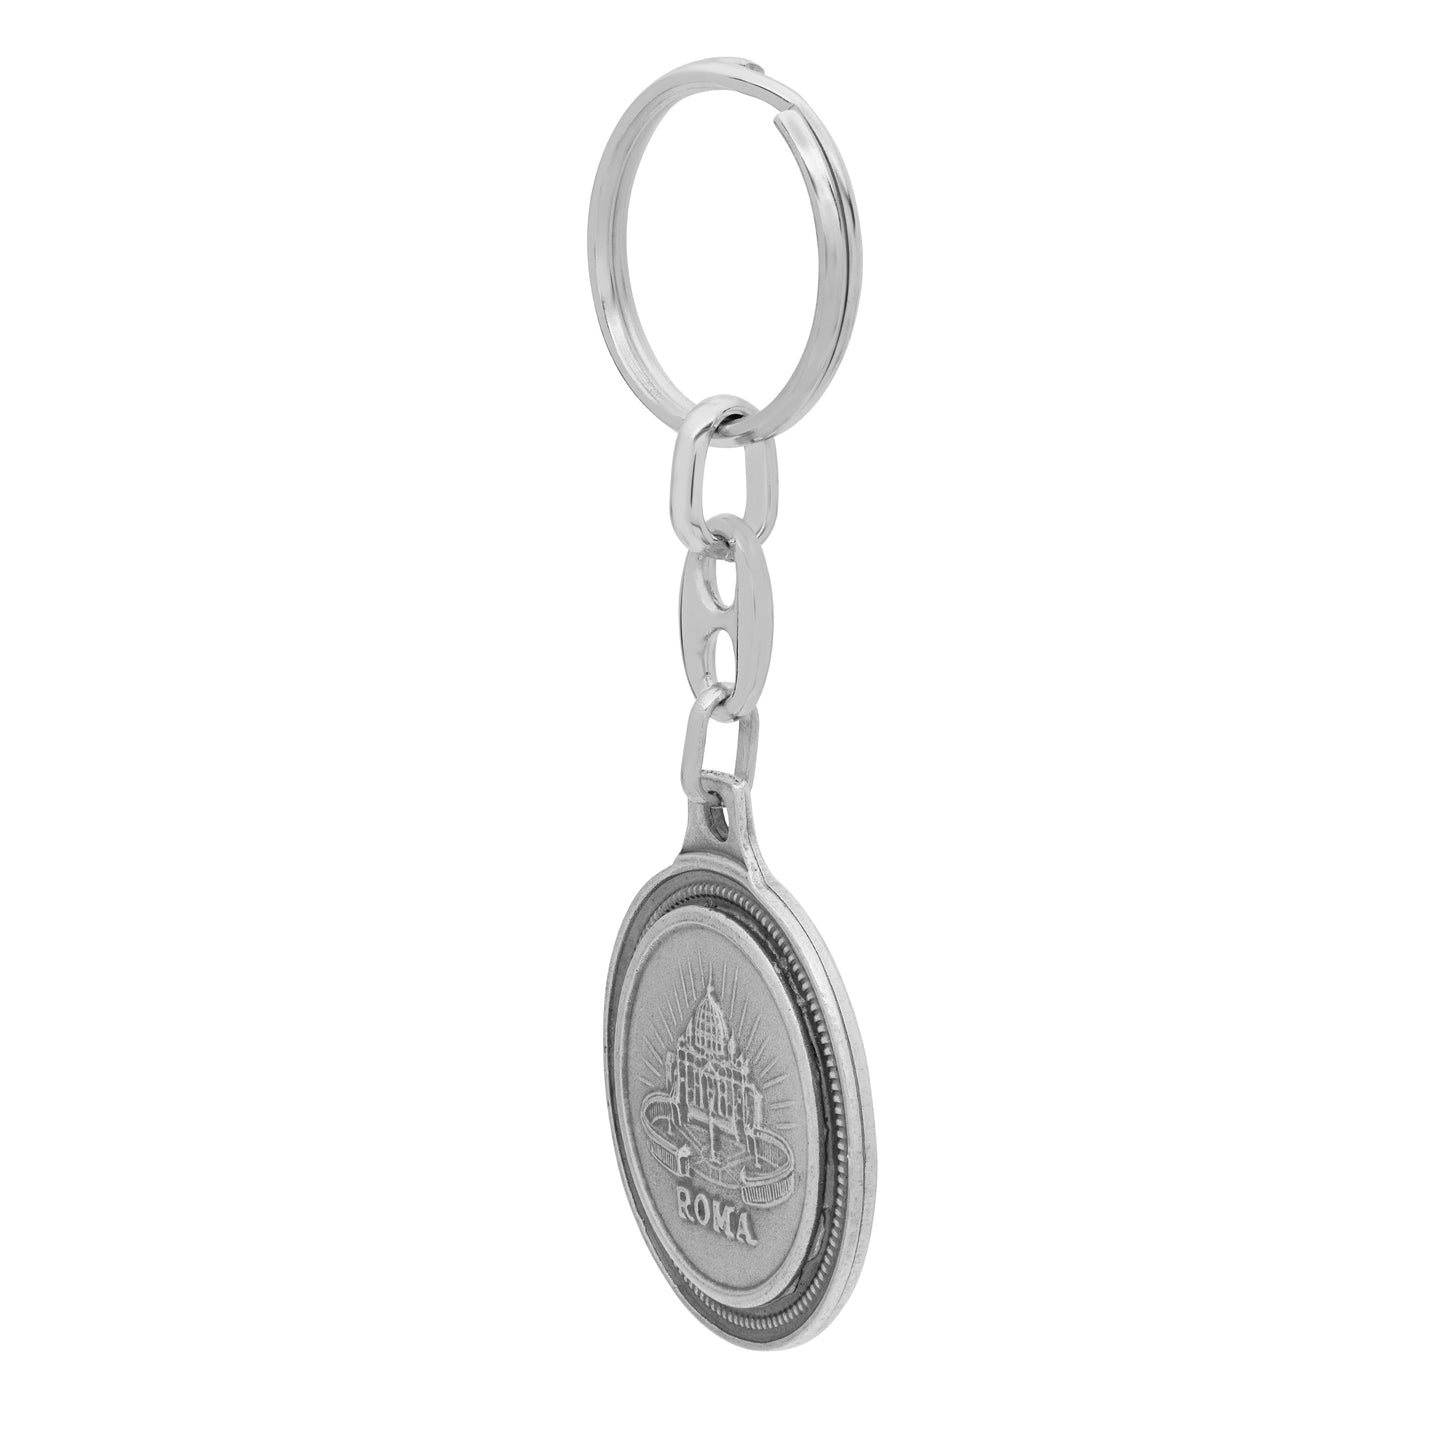 Mondo Cattolico Keychains Round Colored Metal Keychain of Our Lady of the Miraculous Medal